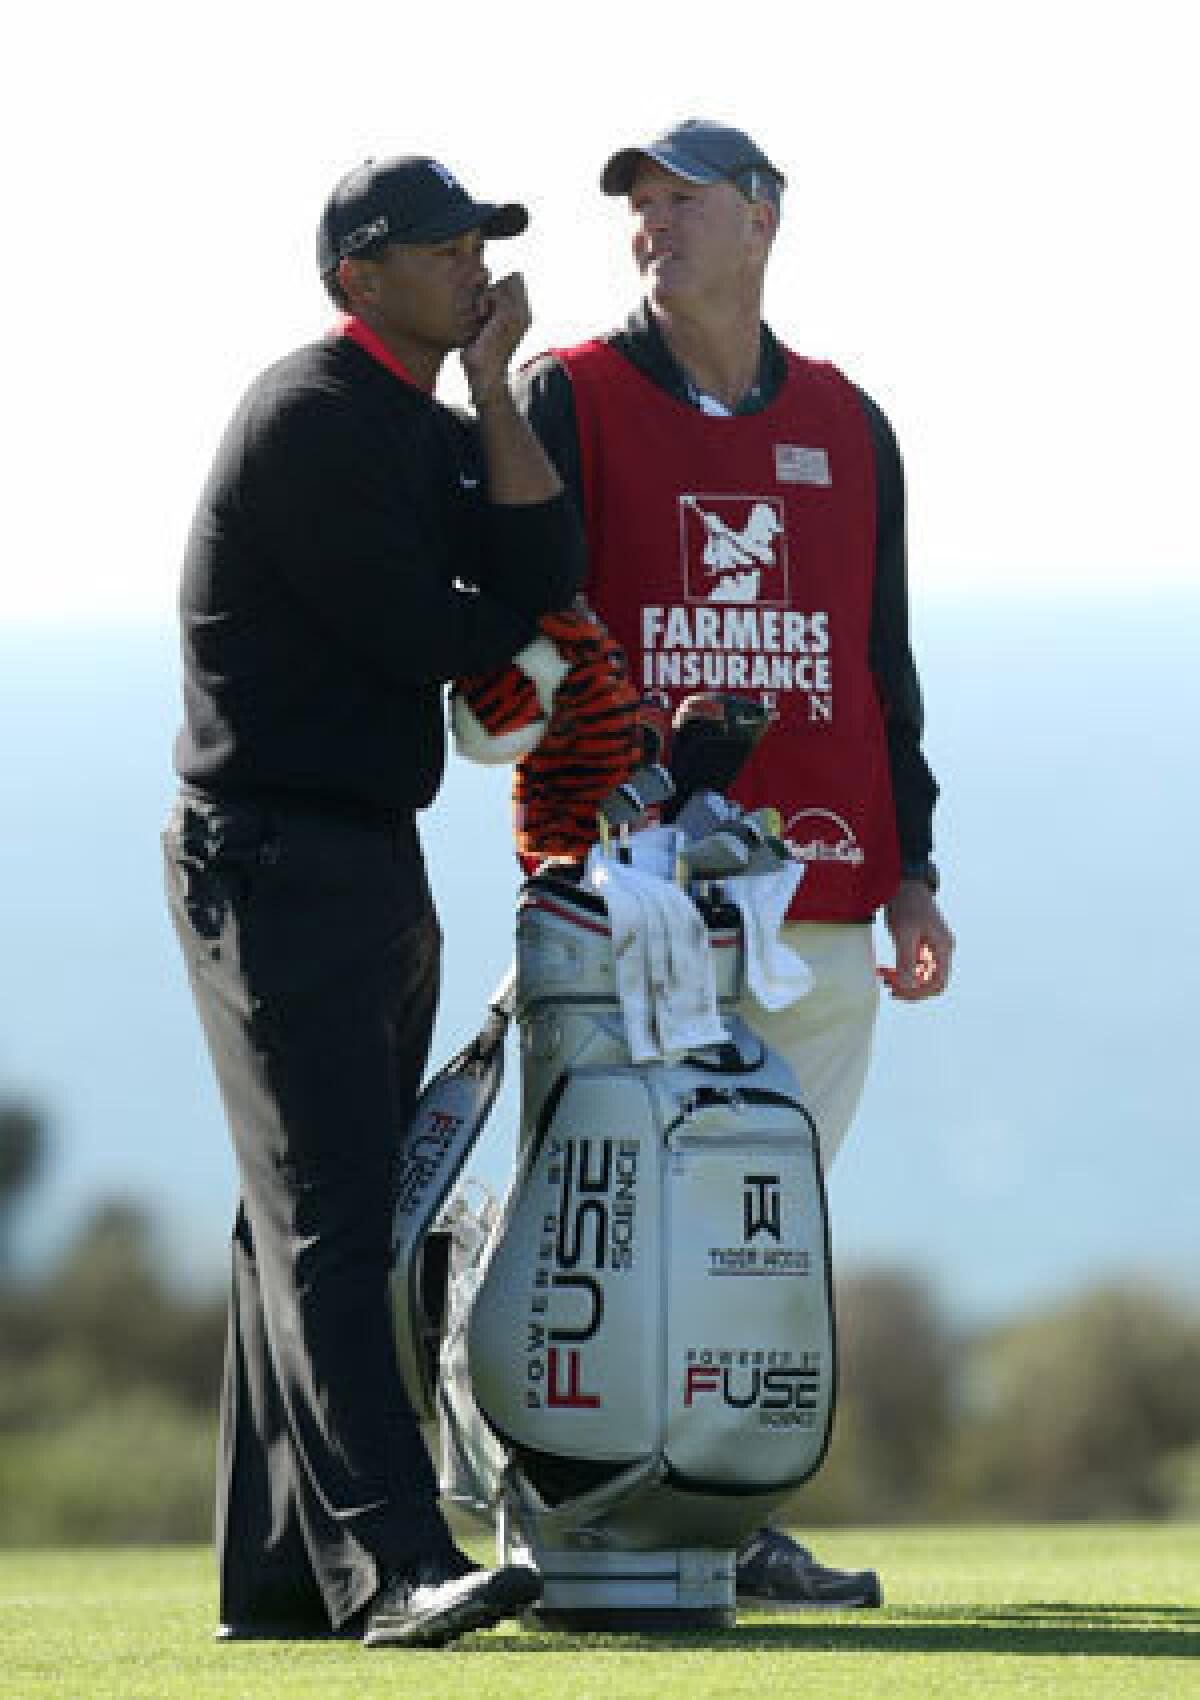 Tiger Woods waits with caddie Joe LaCava on the 17th hole during the final round of the Farmers Insurance Open at Torrey Pines.